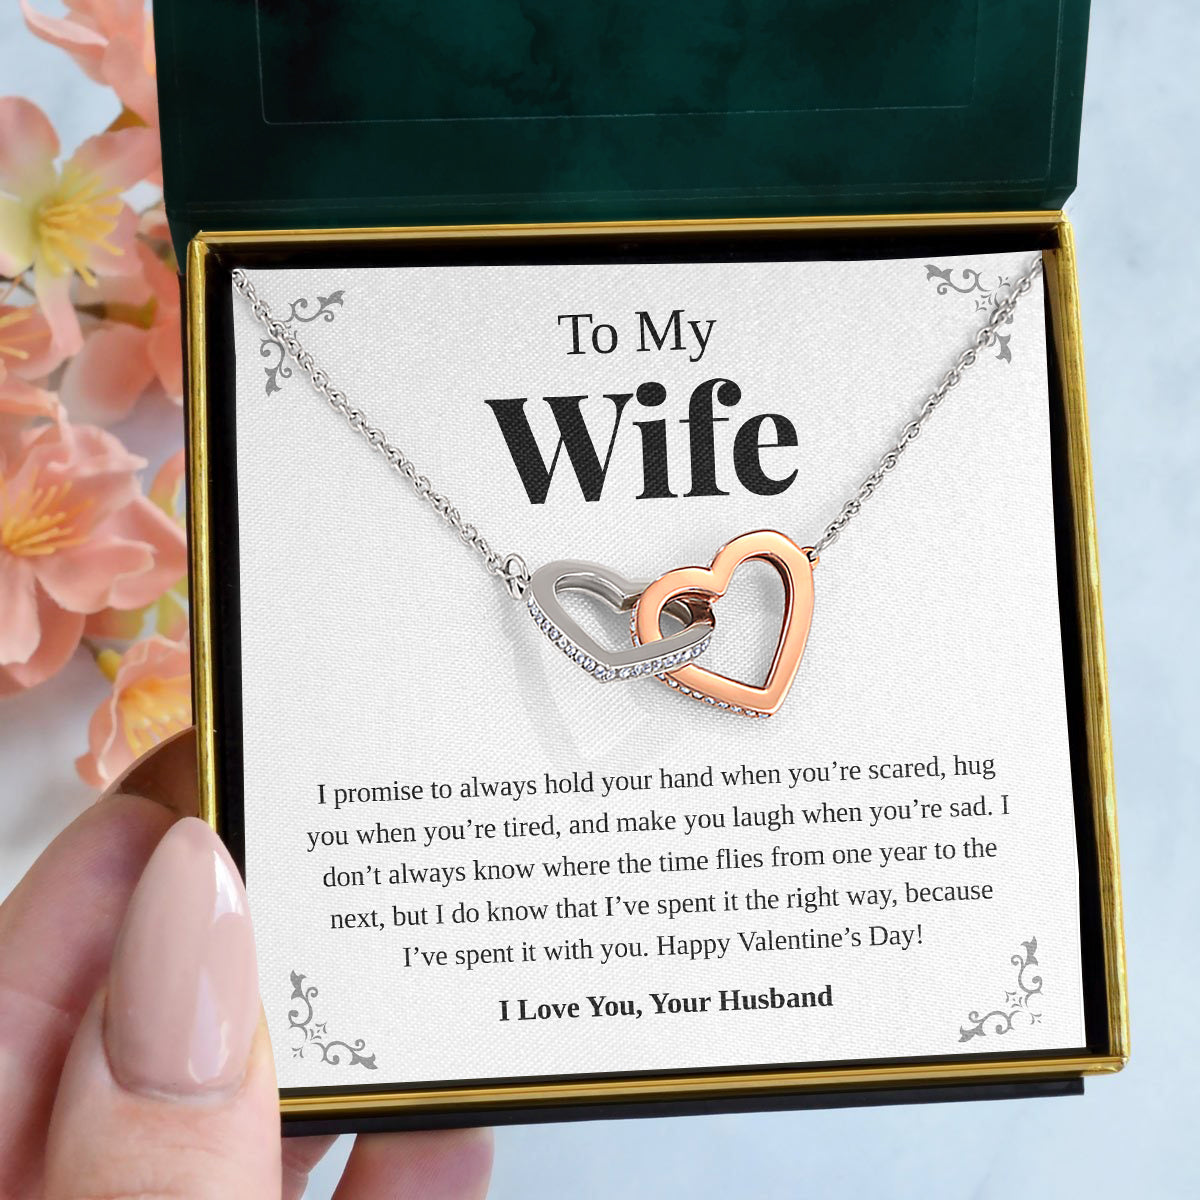 To My Wife | "The Right Way" | Interlocking Hearts Necklace